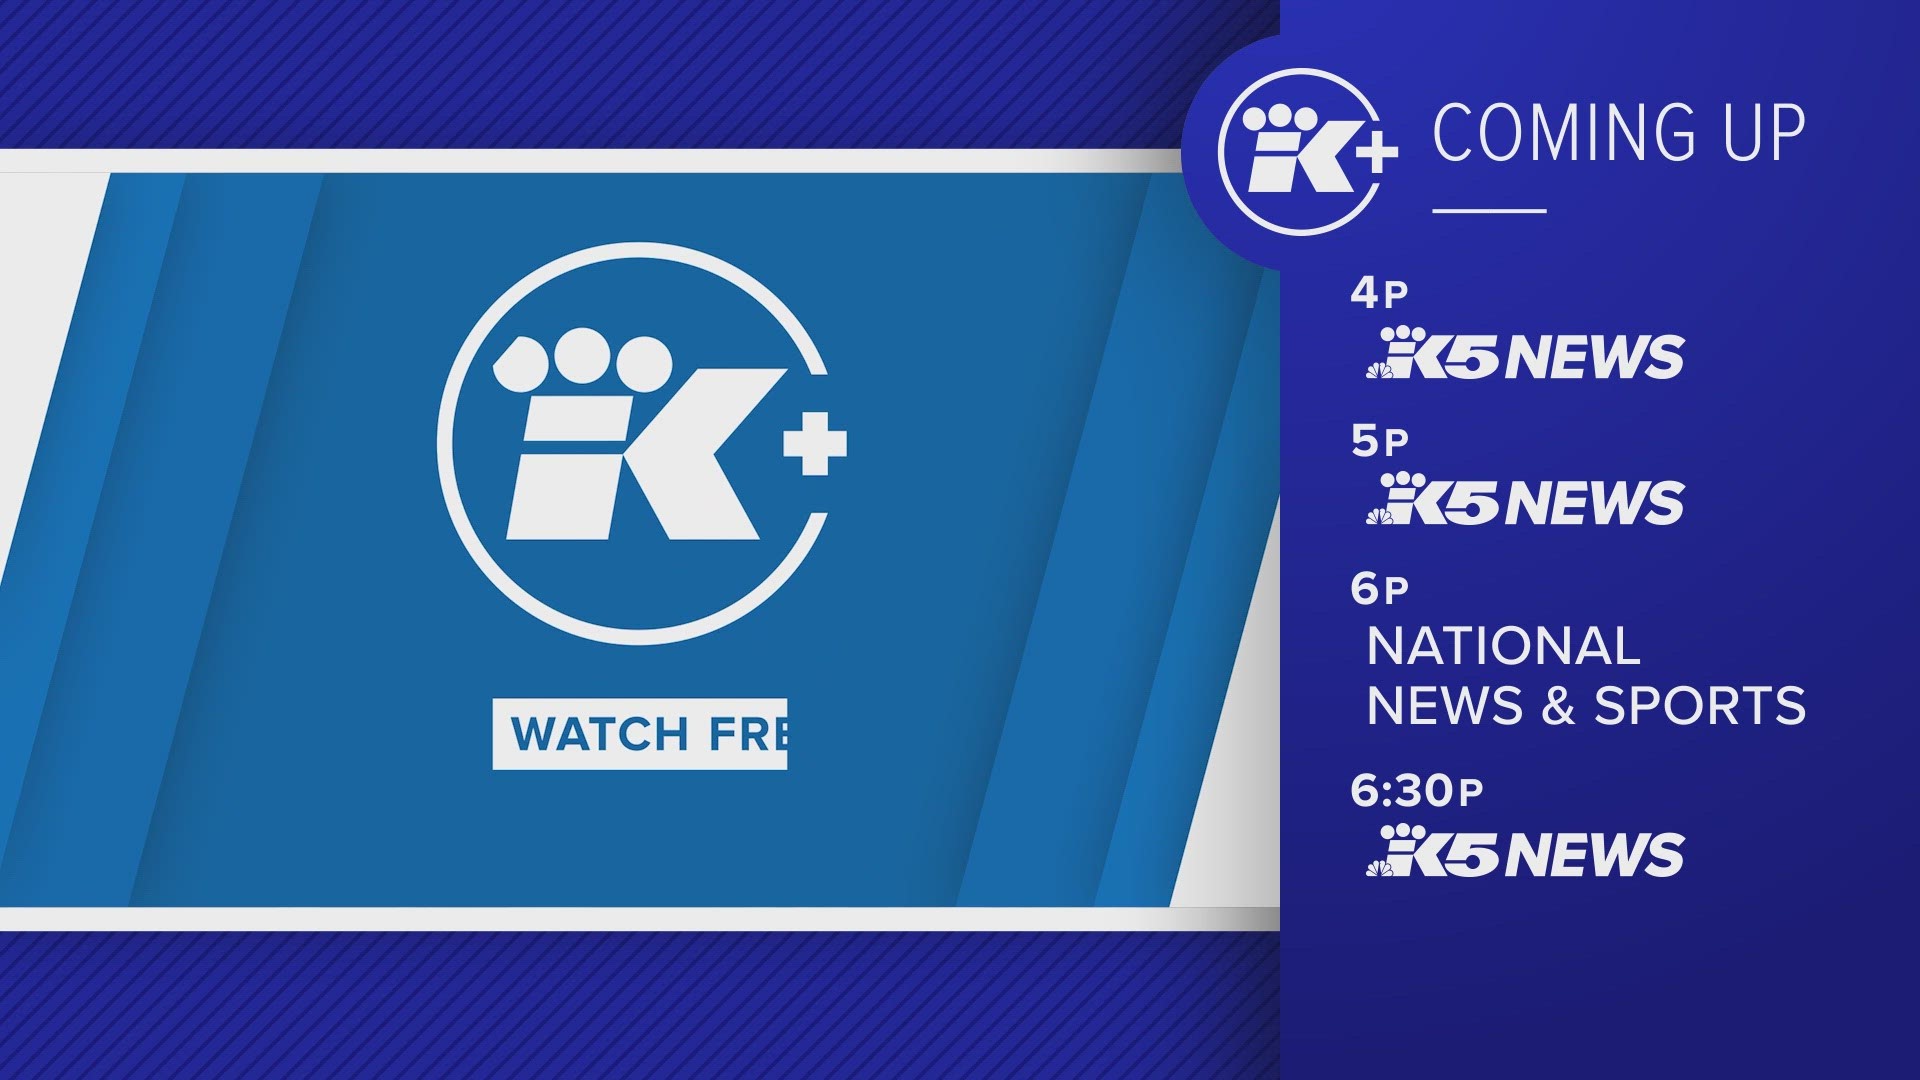 Here's what's coming up at 4 p.m. on KING 5+.